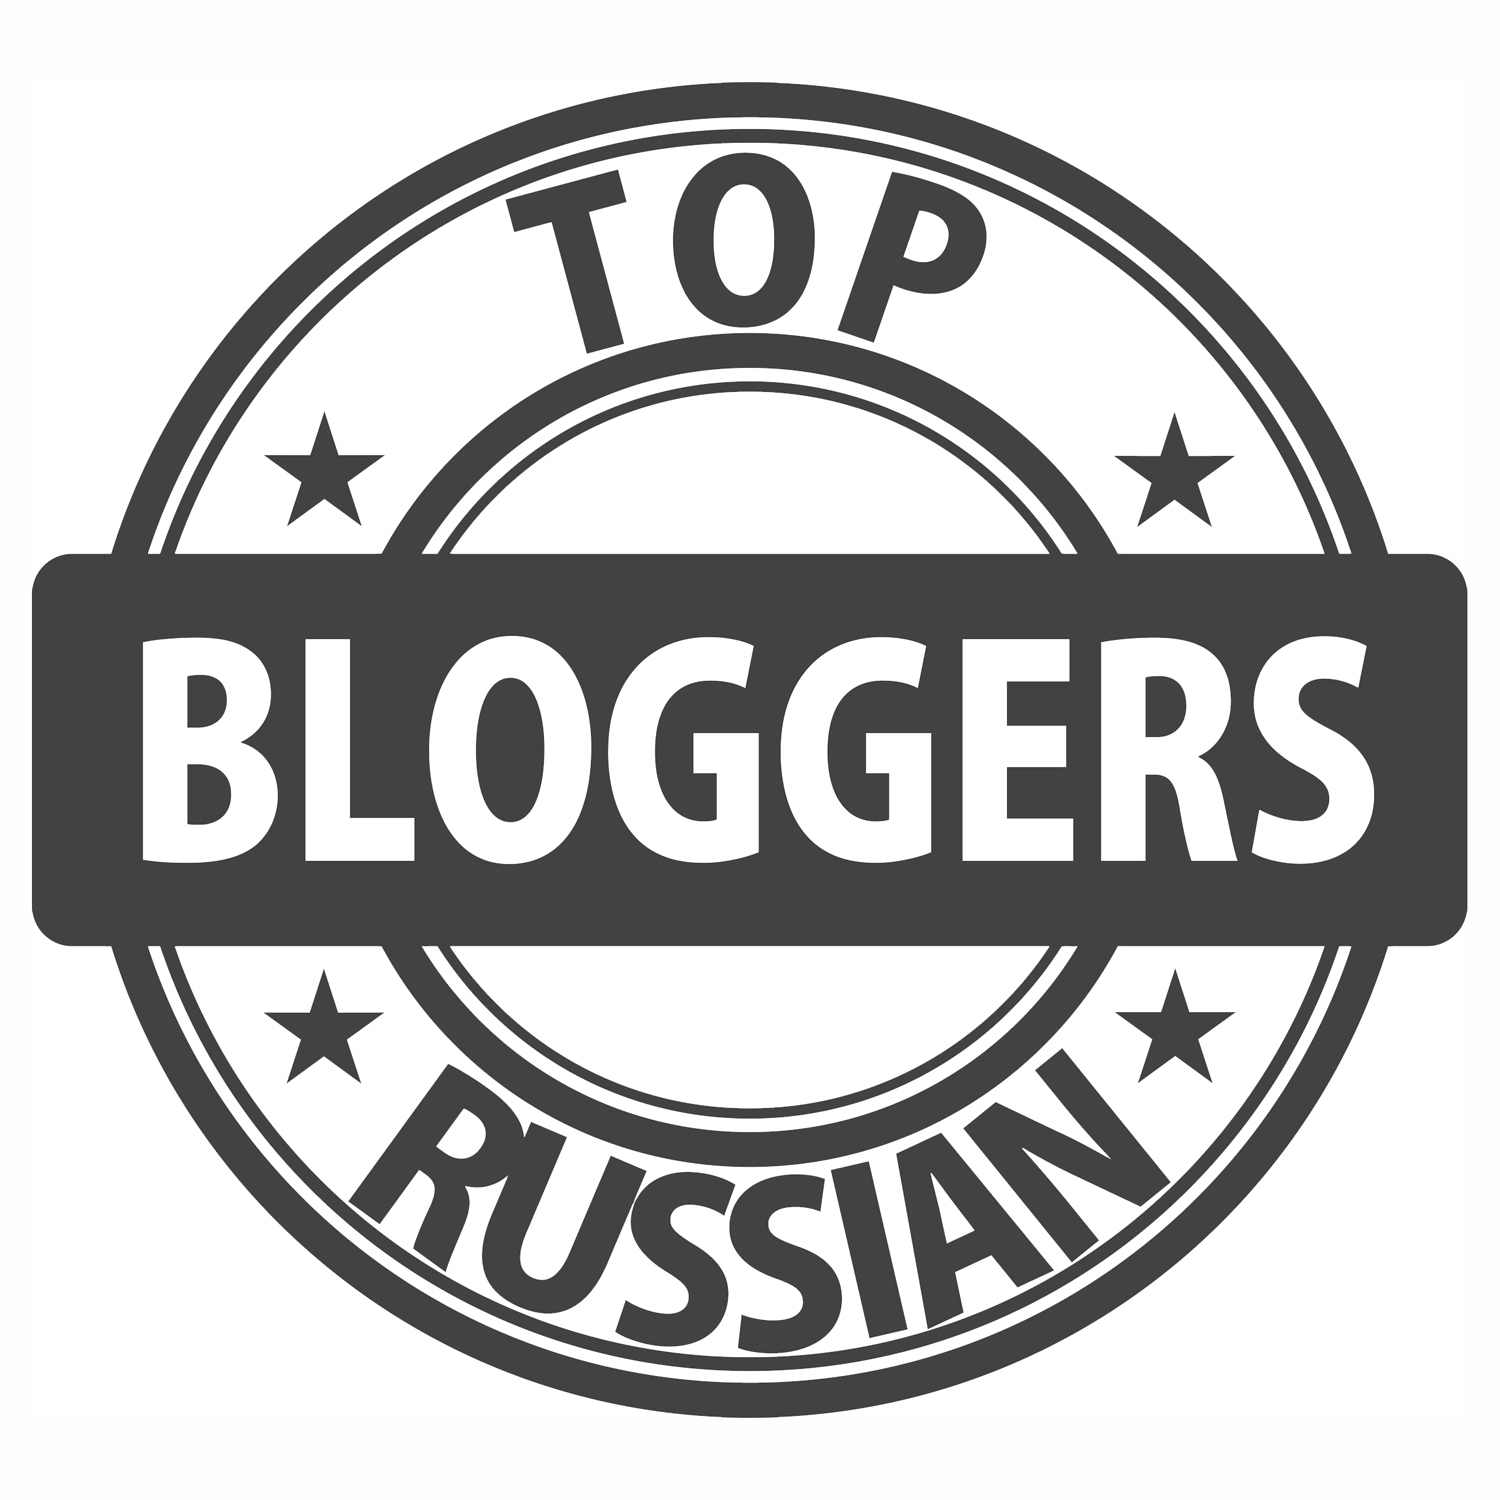 TOP RUSSIAN BLOGGERS